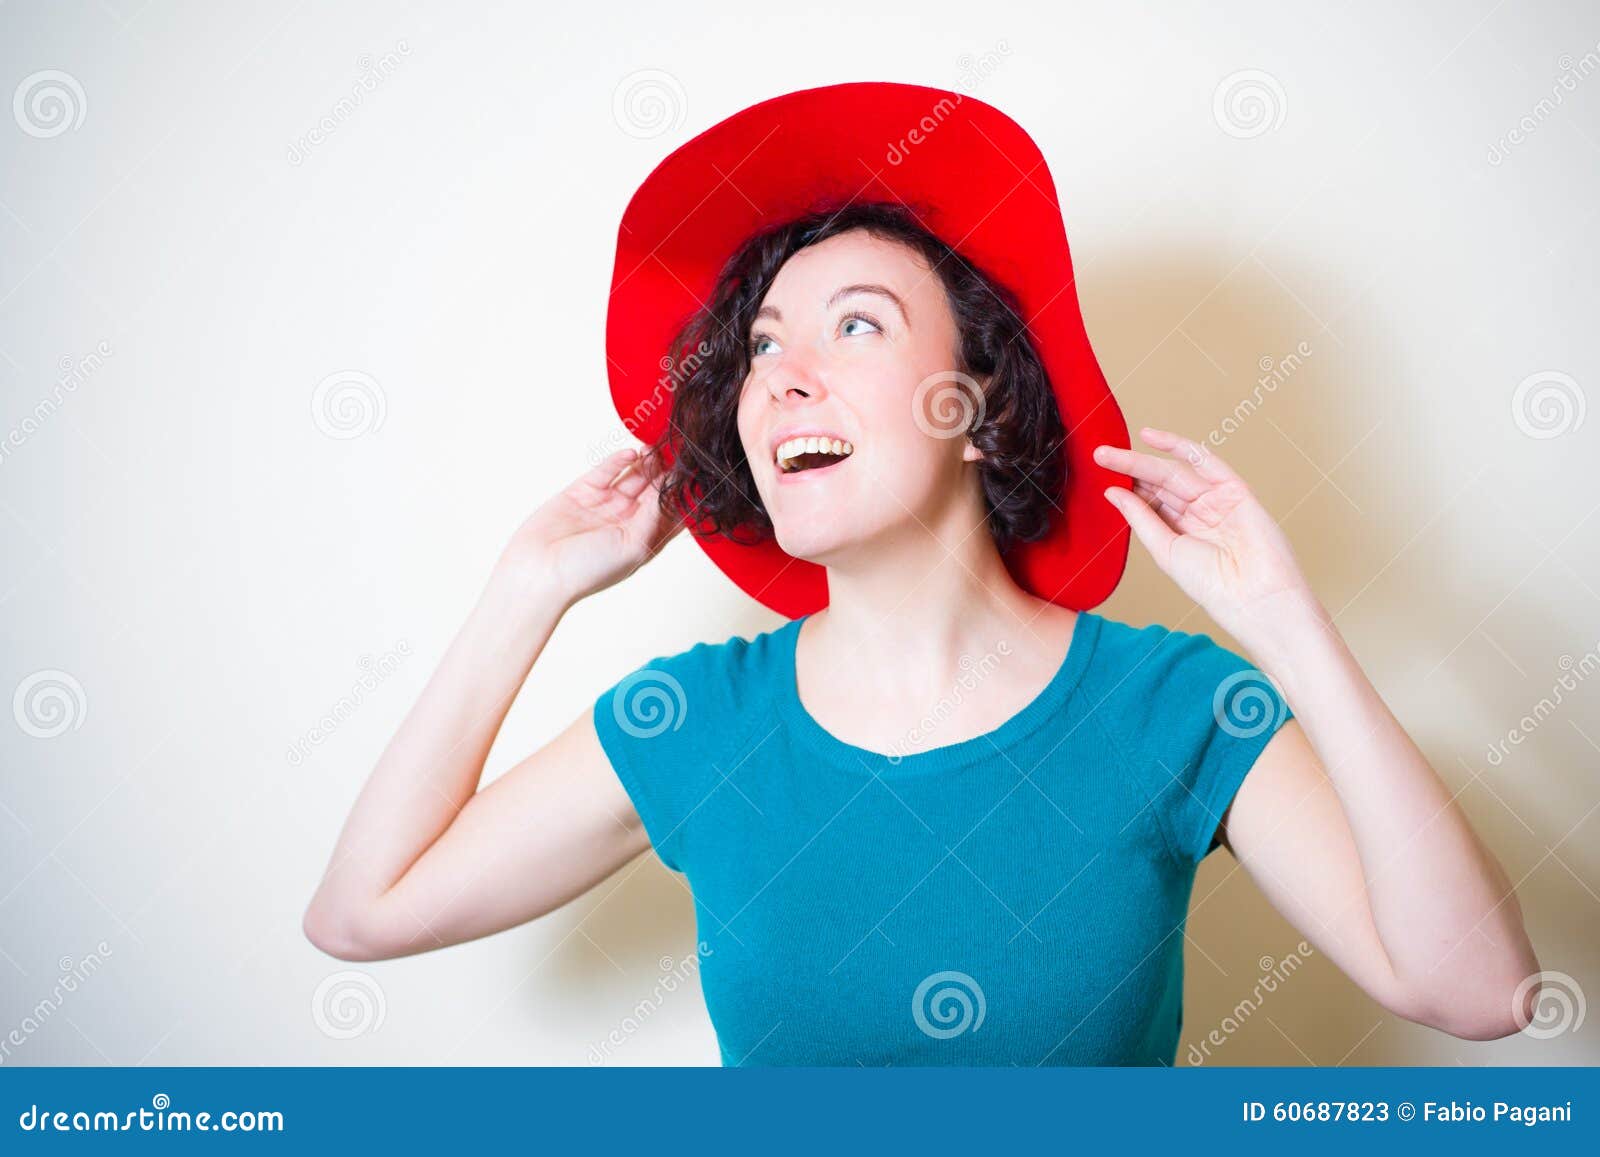 Young Woman with Red Hat and Blue Dress Posing Stock Image - Image of ...